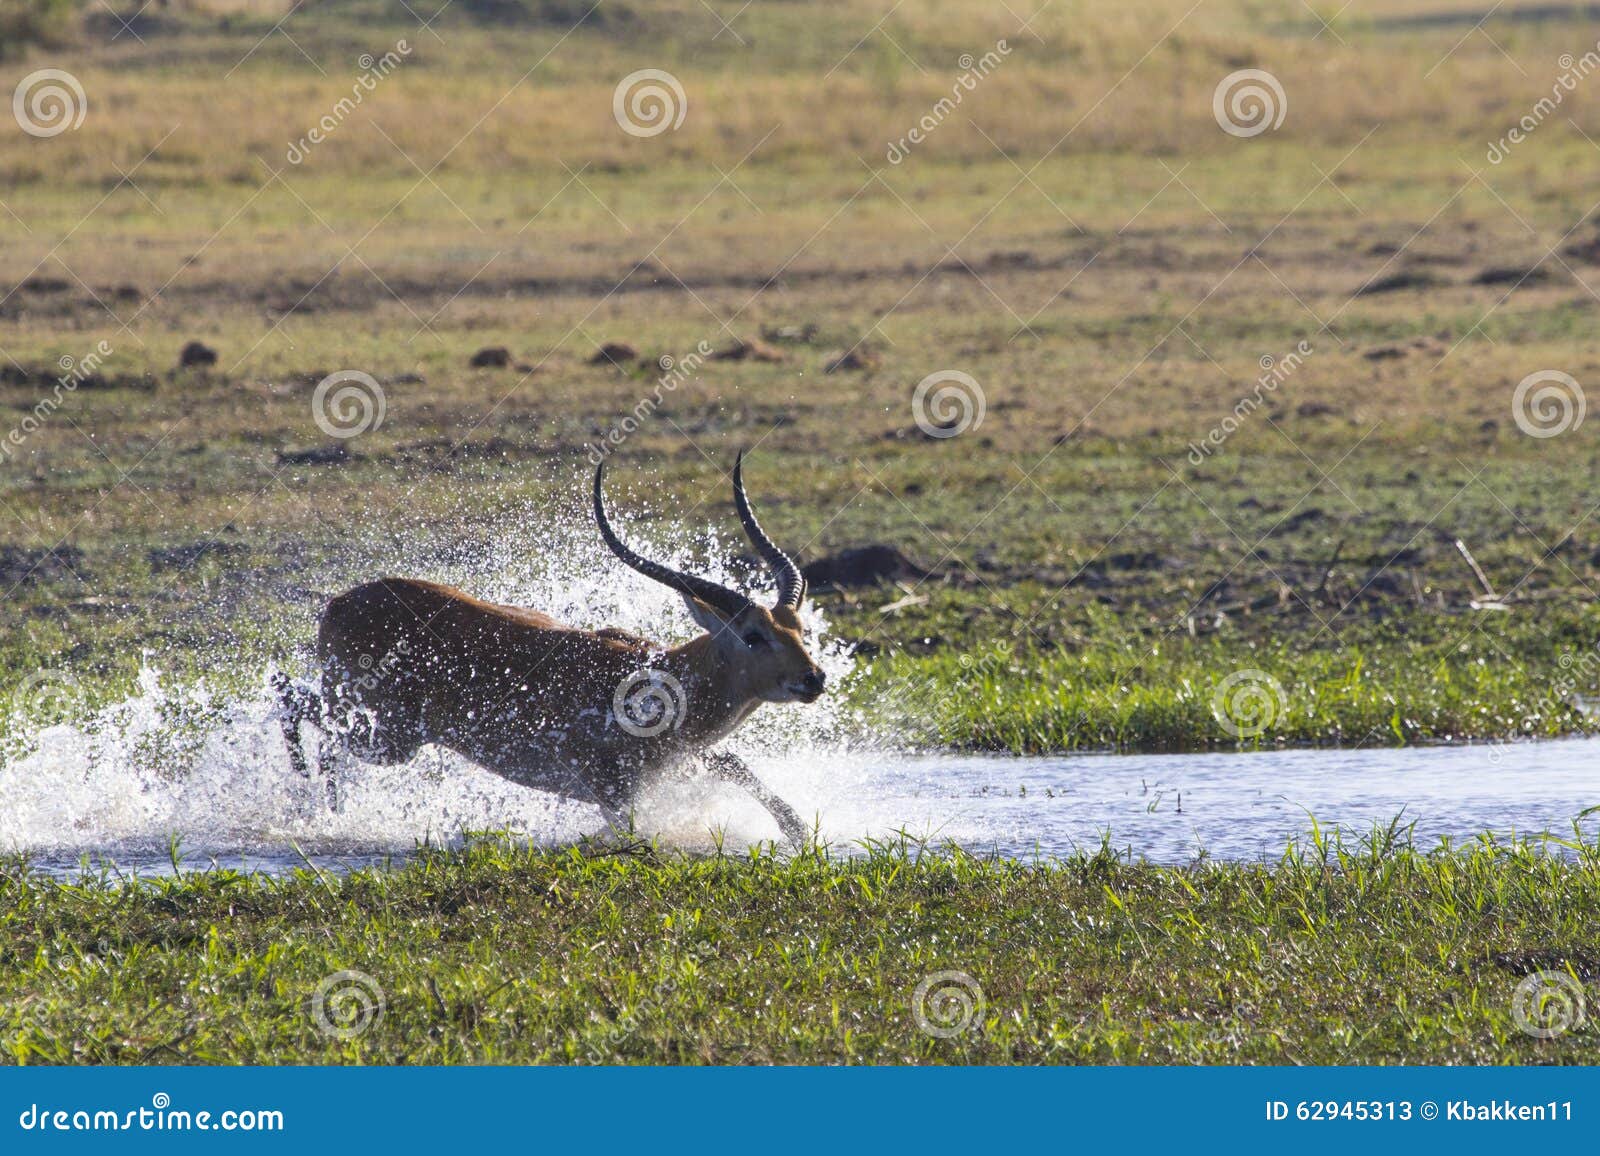 an impala leaps through the water.